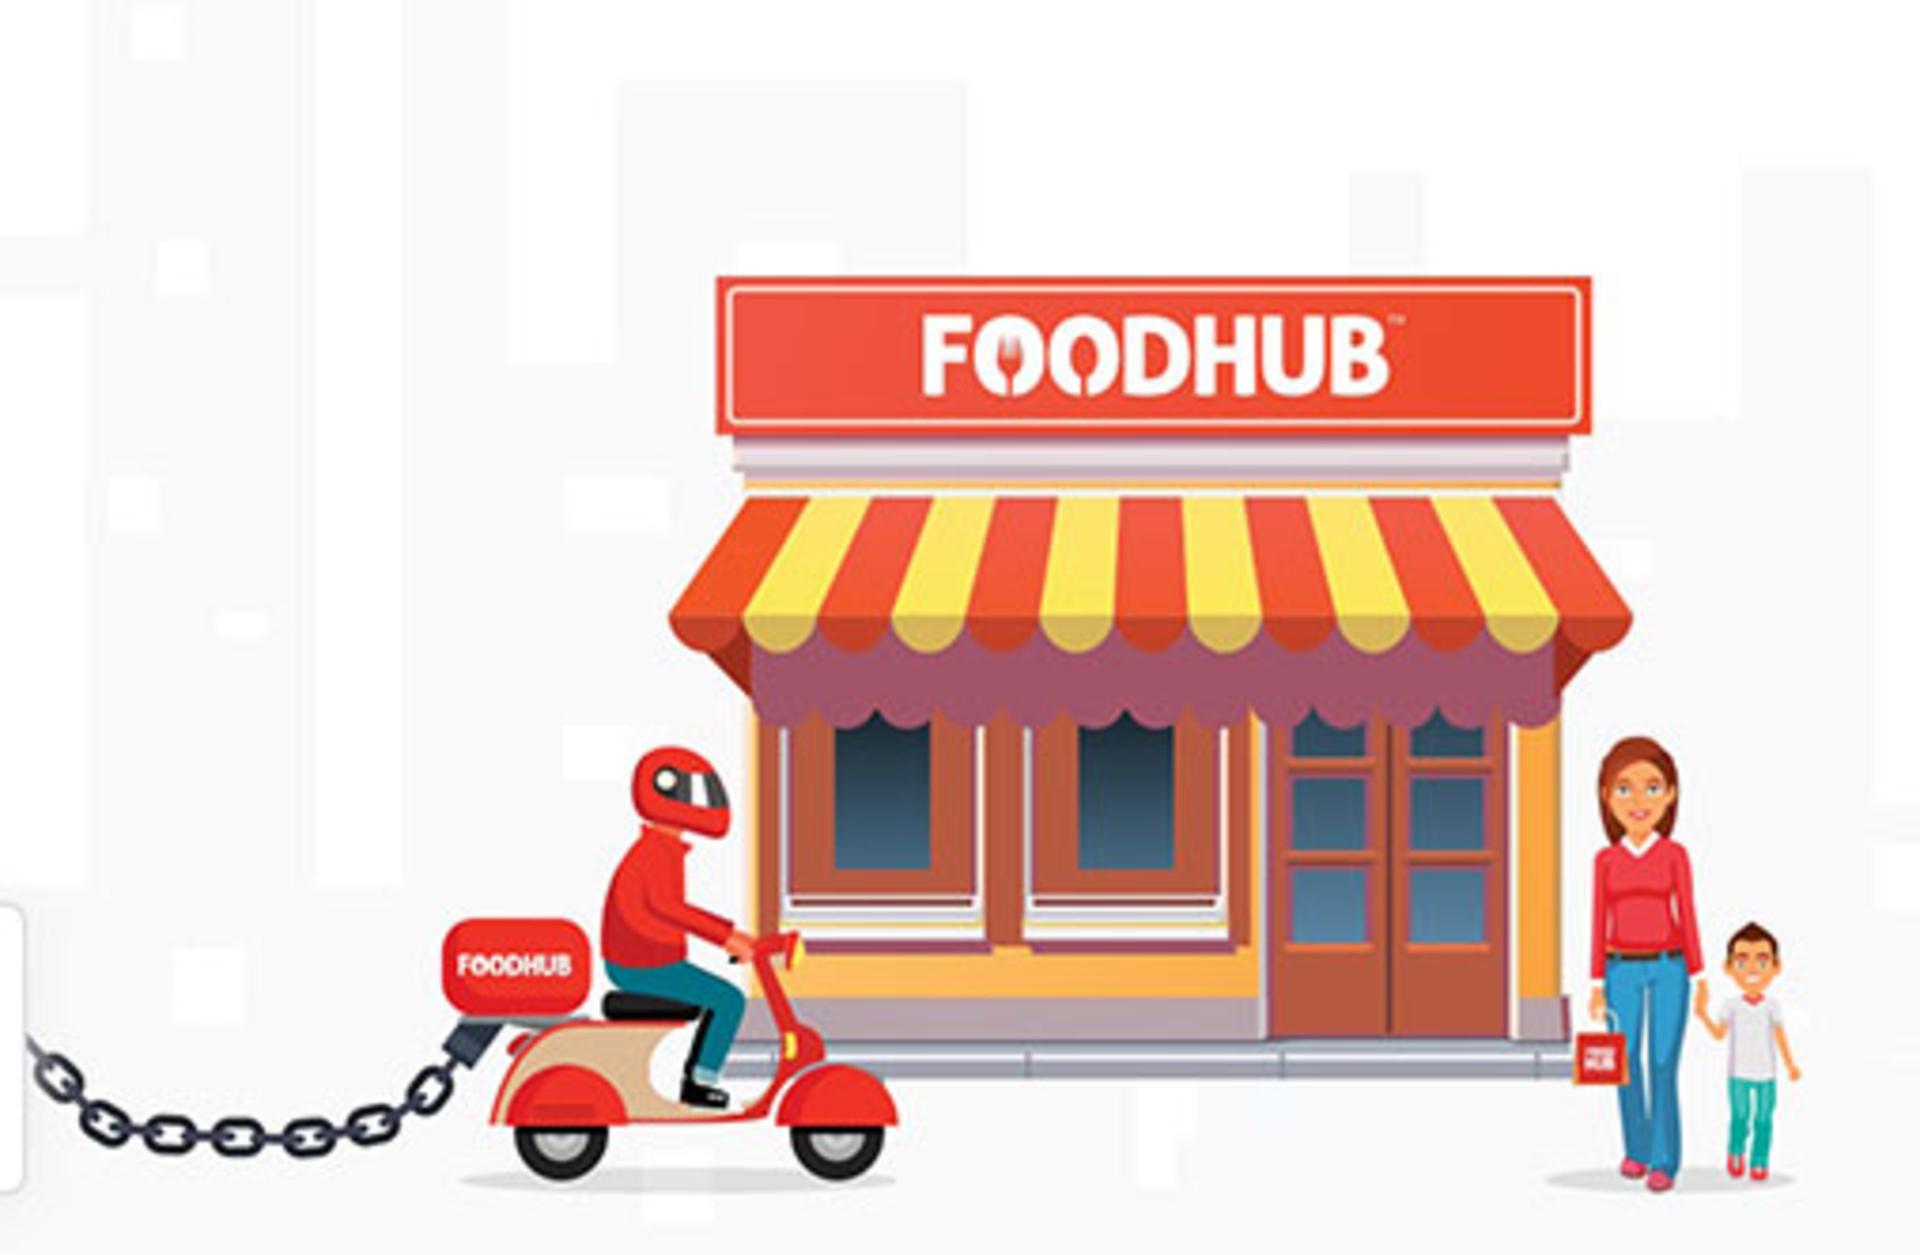 Foodhub looks to raise £100m for acquisition drive